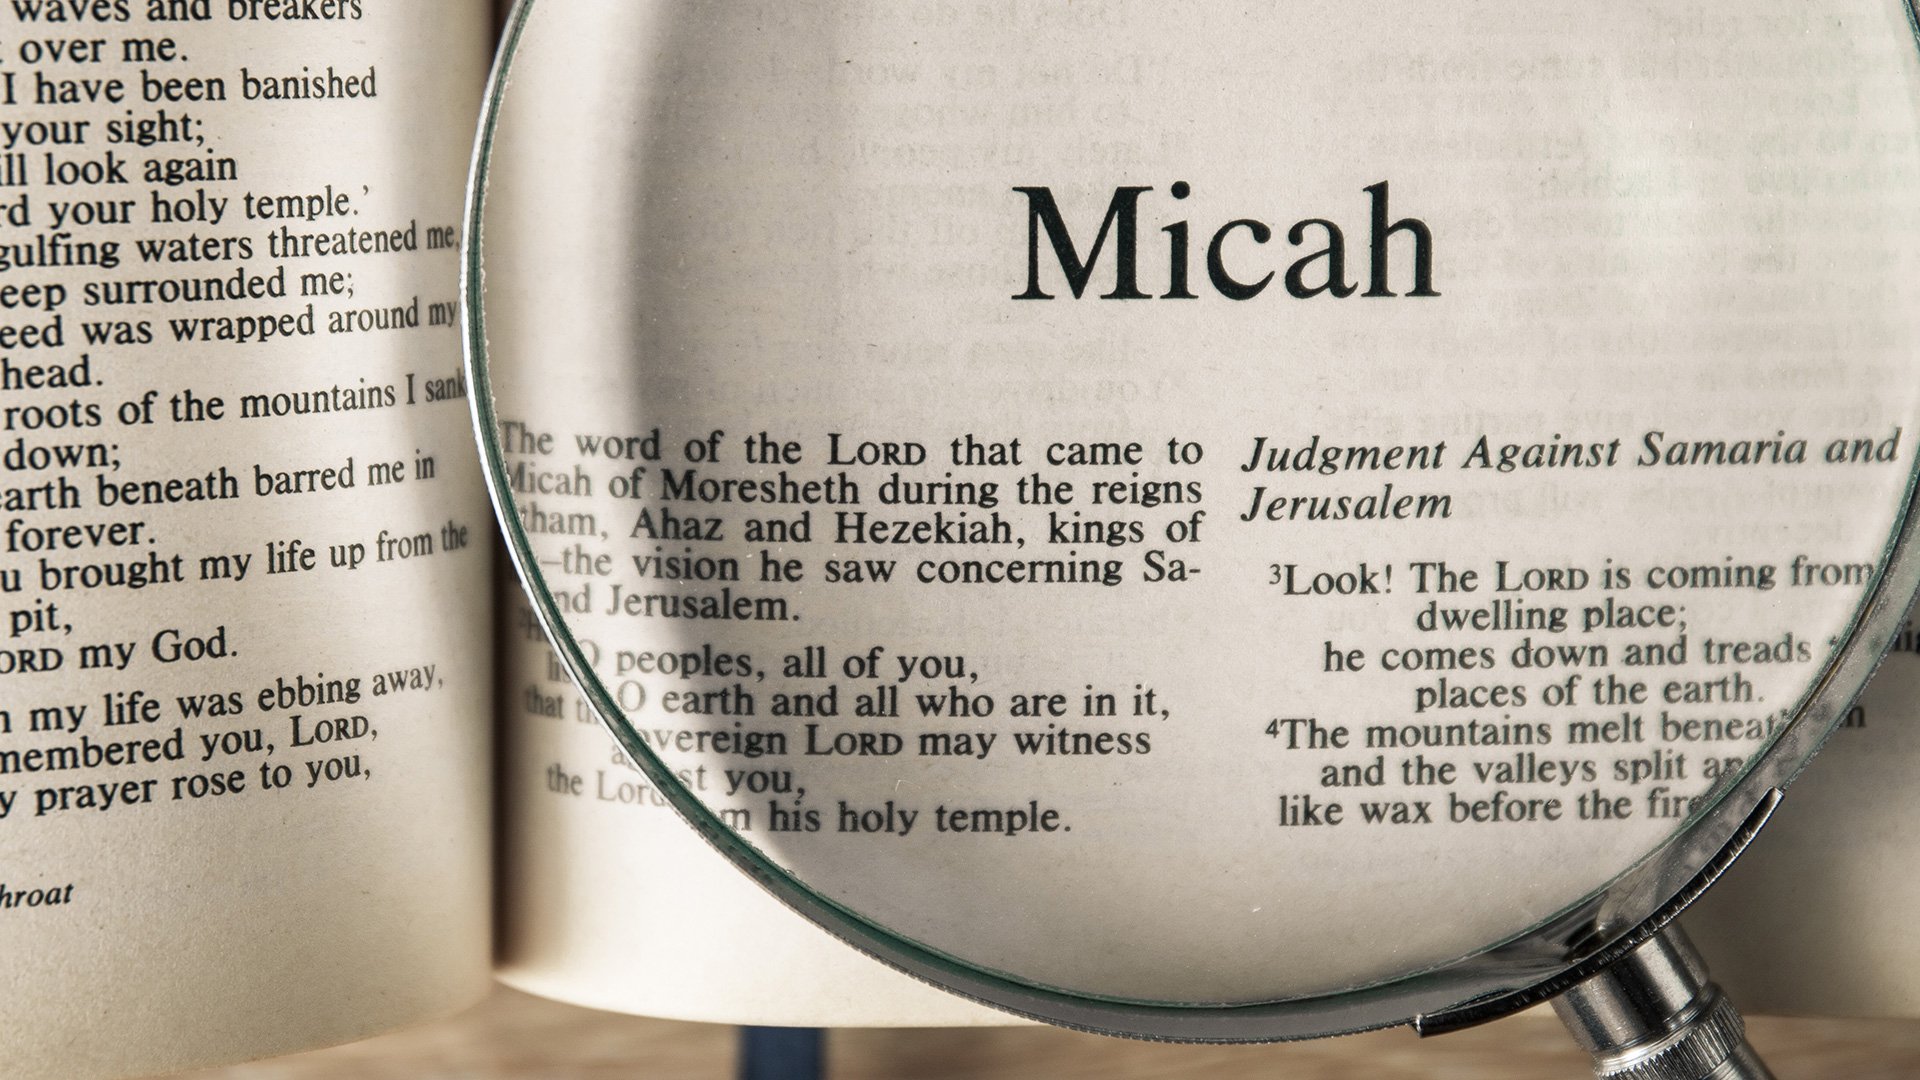 The Integrity and Authenticity of the Book of Micah